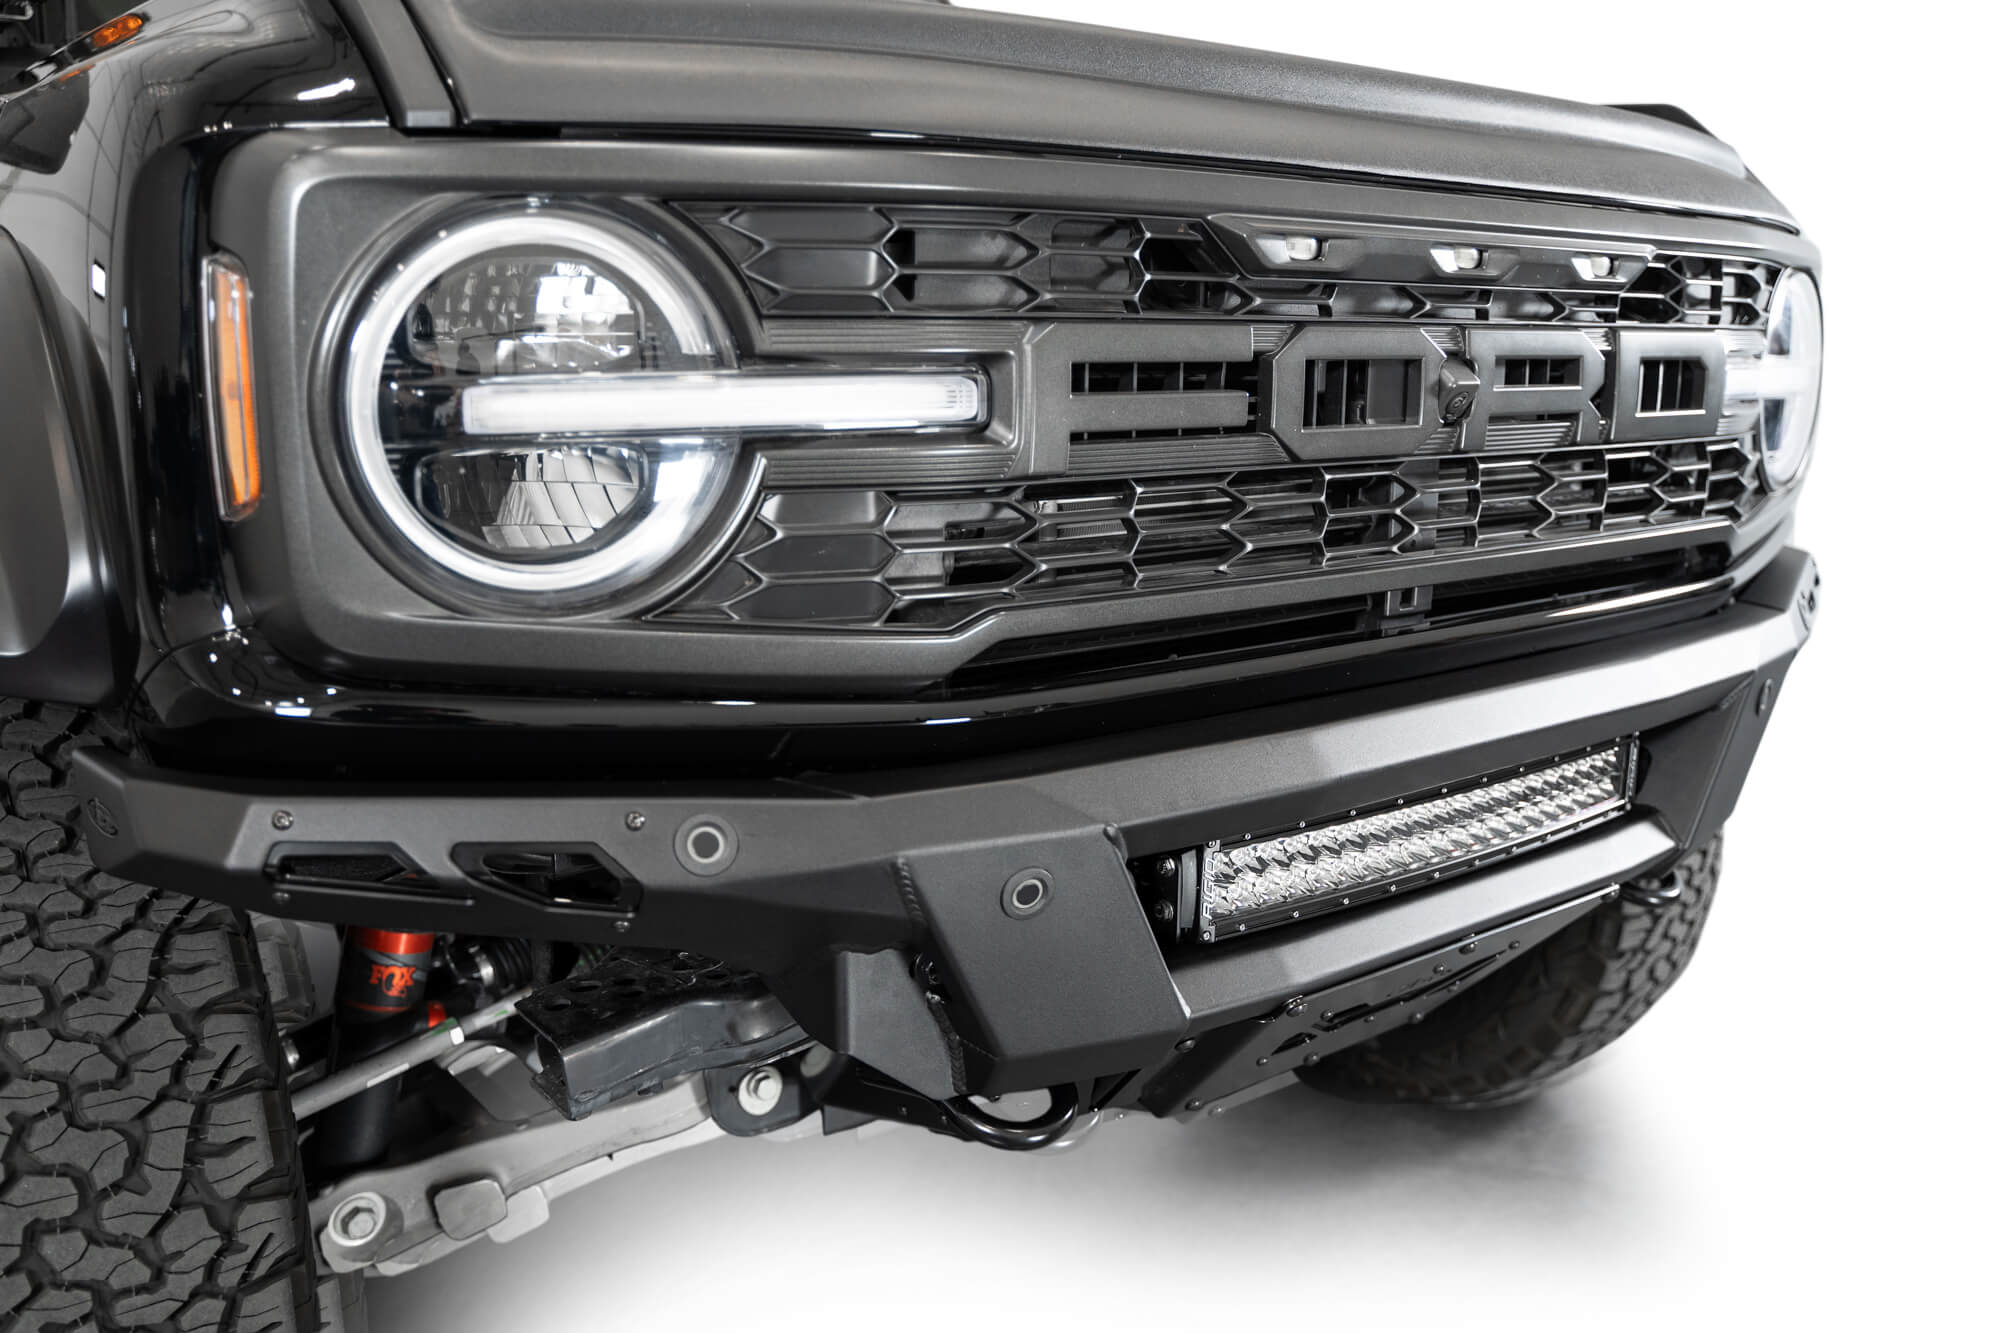 Quality steel Phantom Front Bumper for the 2022-2023 Ford Bronco Raptor